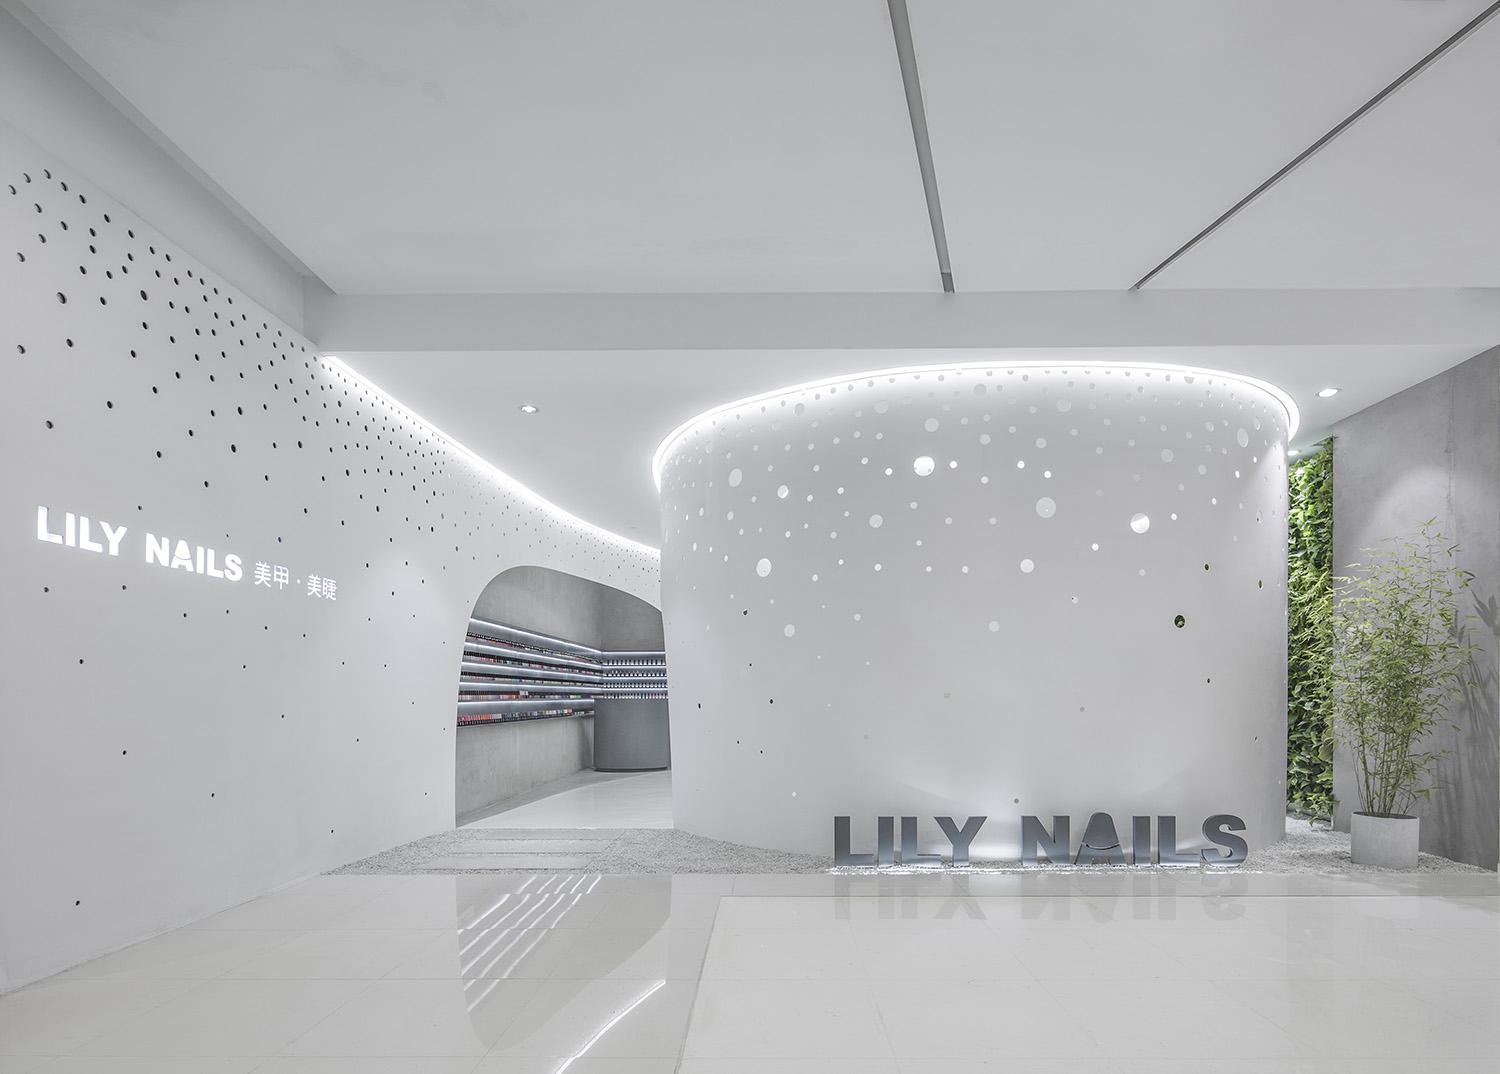 Review: Inside the chic 1010 The Nail Spa in South Mumbai -